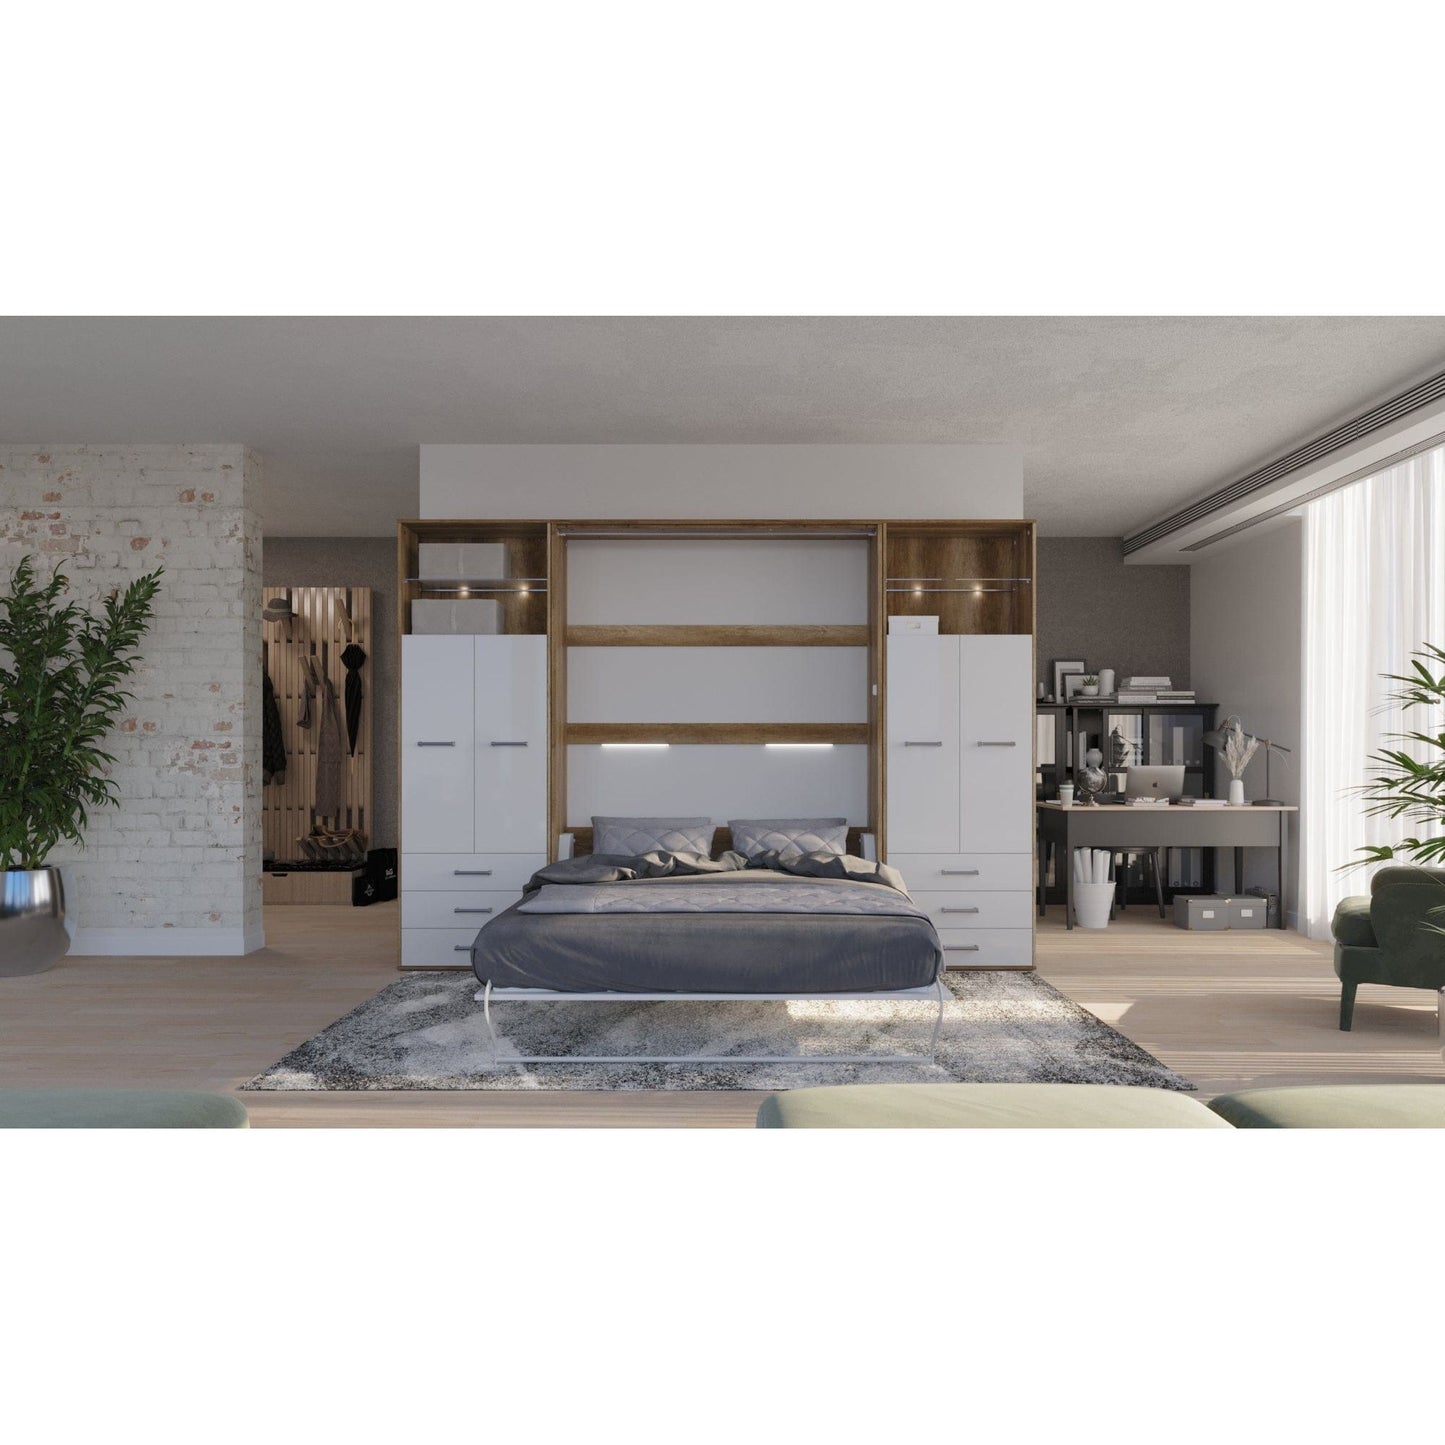 Maxima House Vertical Murphy Bed Invento. European Queen + 2 cabinets